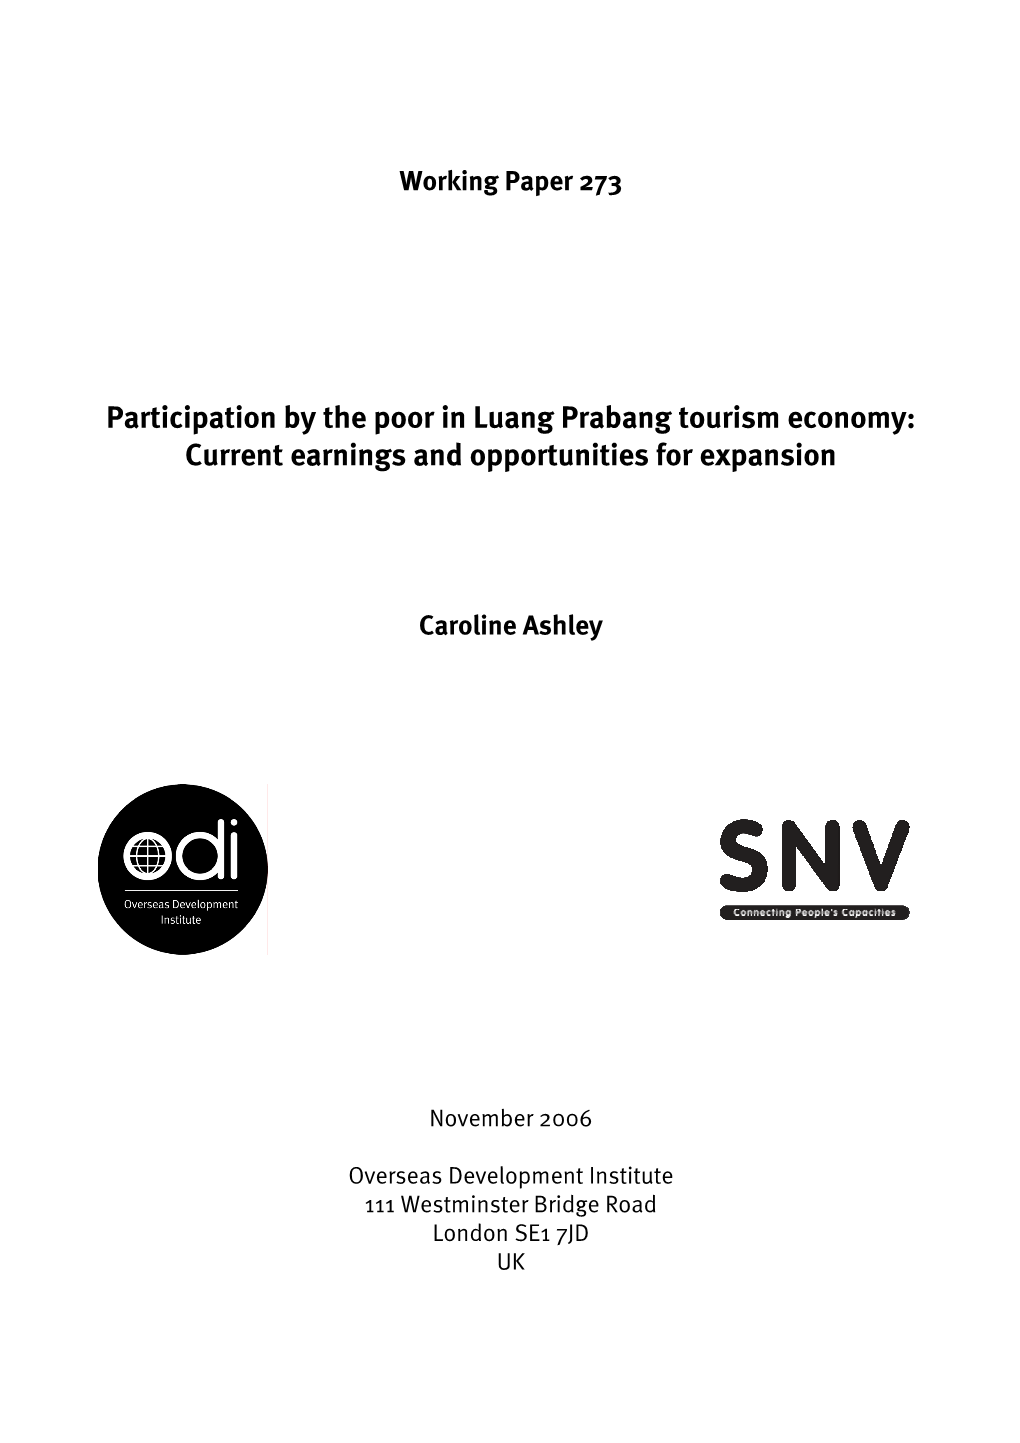 Participation by the Poor in Luang Prabang Tourism Economy: Current Earnings and Opportunities for Expansion